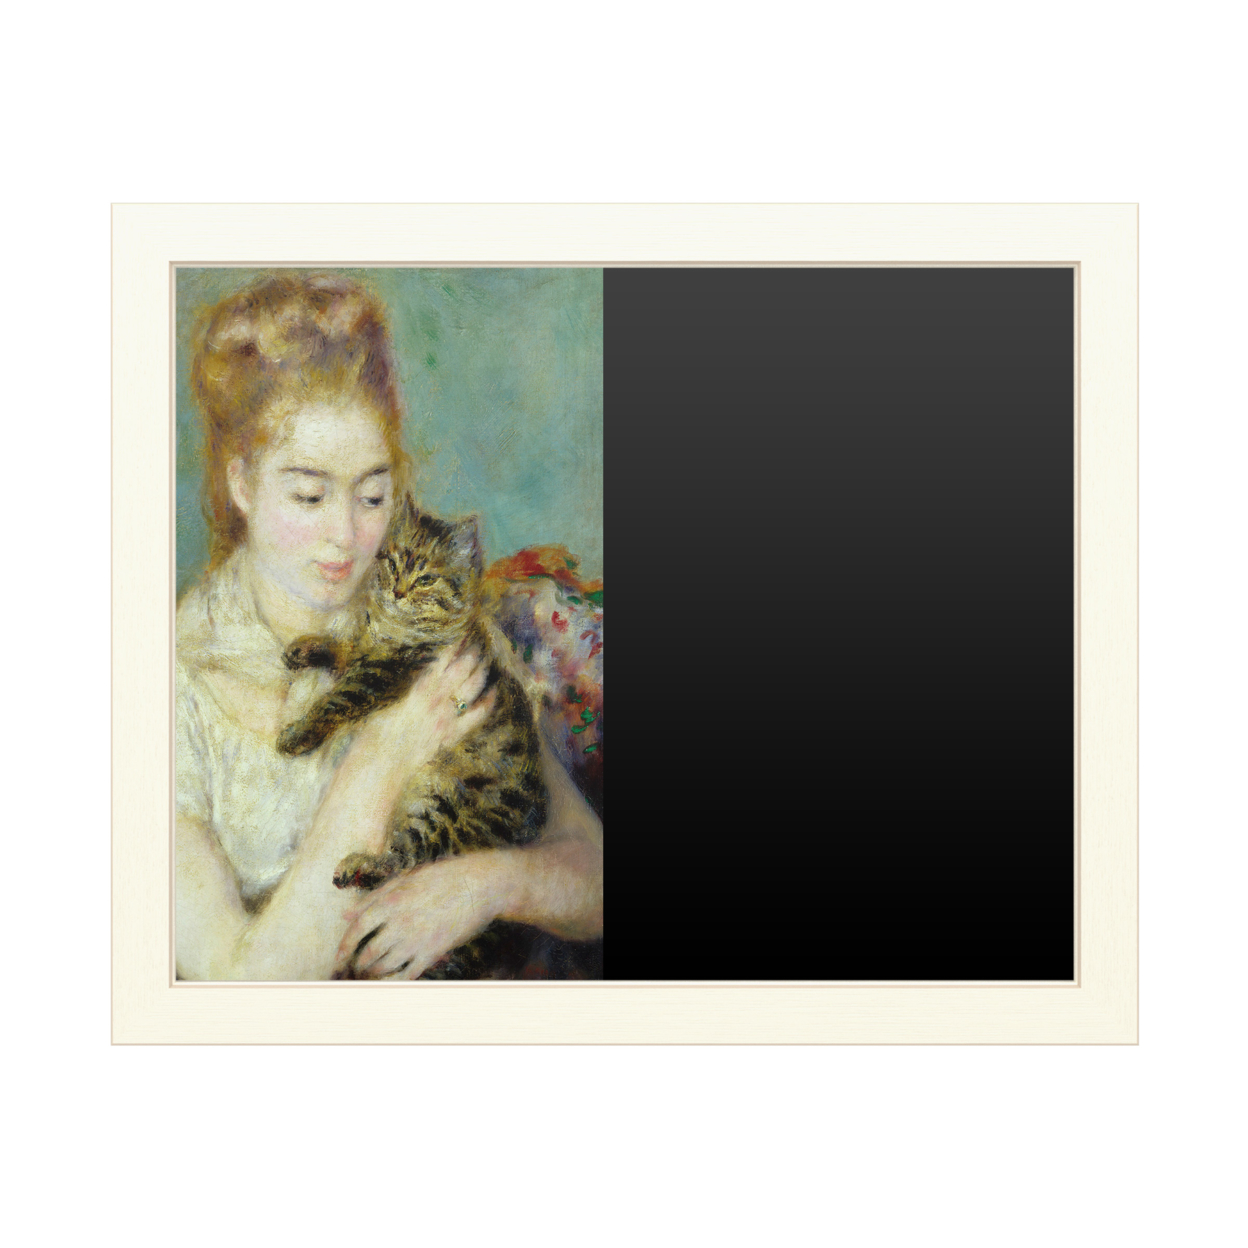 16 X 20 Chalk Board With Printed Artwork - Pierre Renoir Woman With A Cat 1875 White Board - Ready To Hang Chalkboard